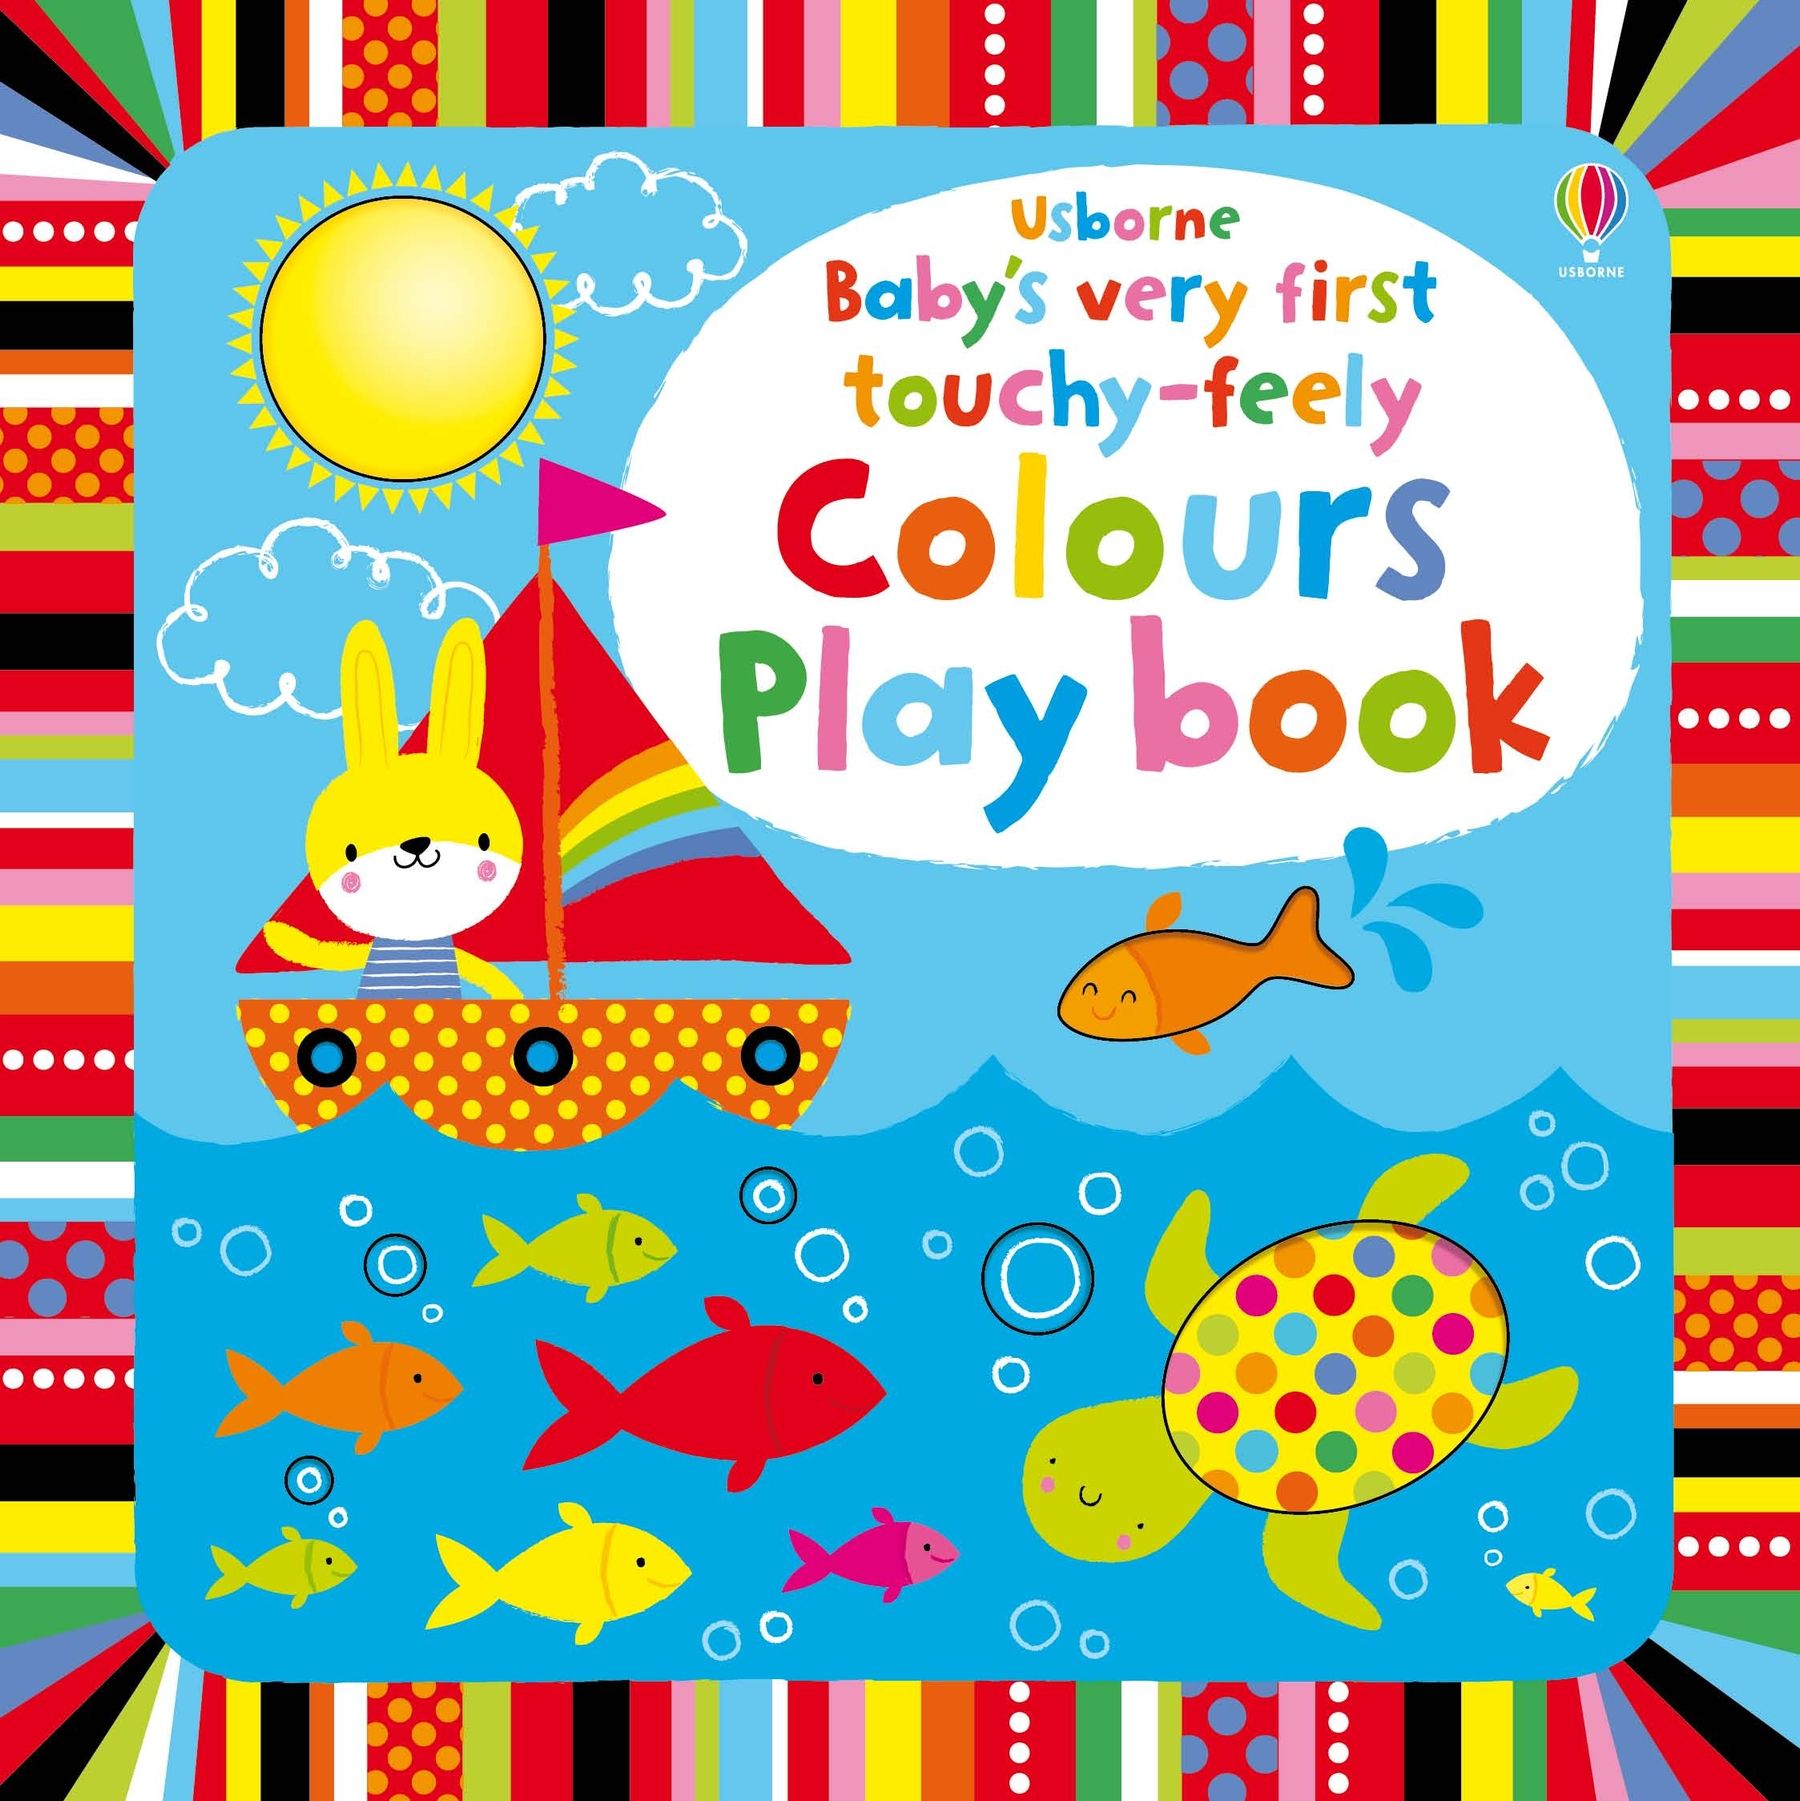 Usborne Books | Baby's Very First touchy-feely Colours Play book